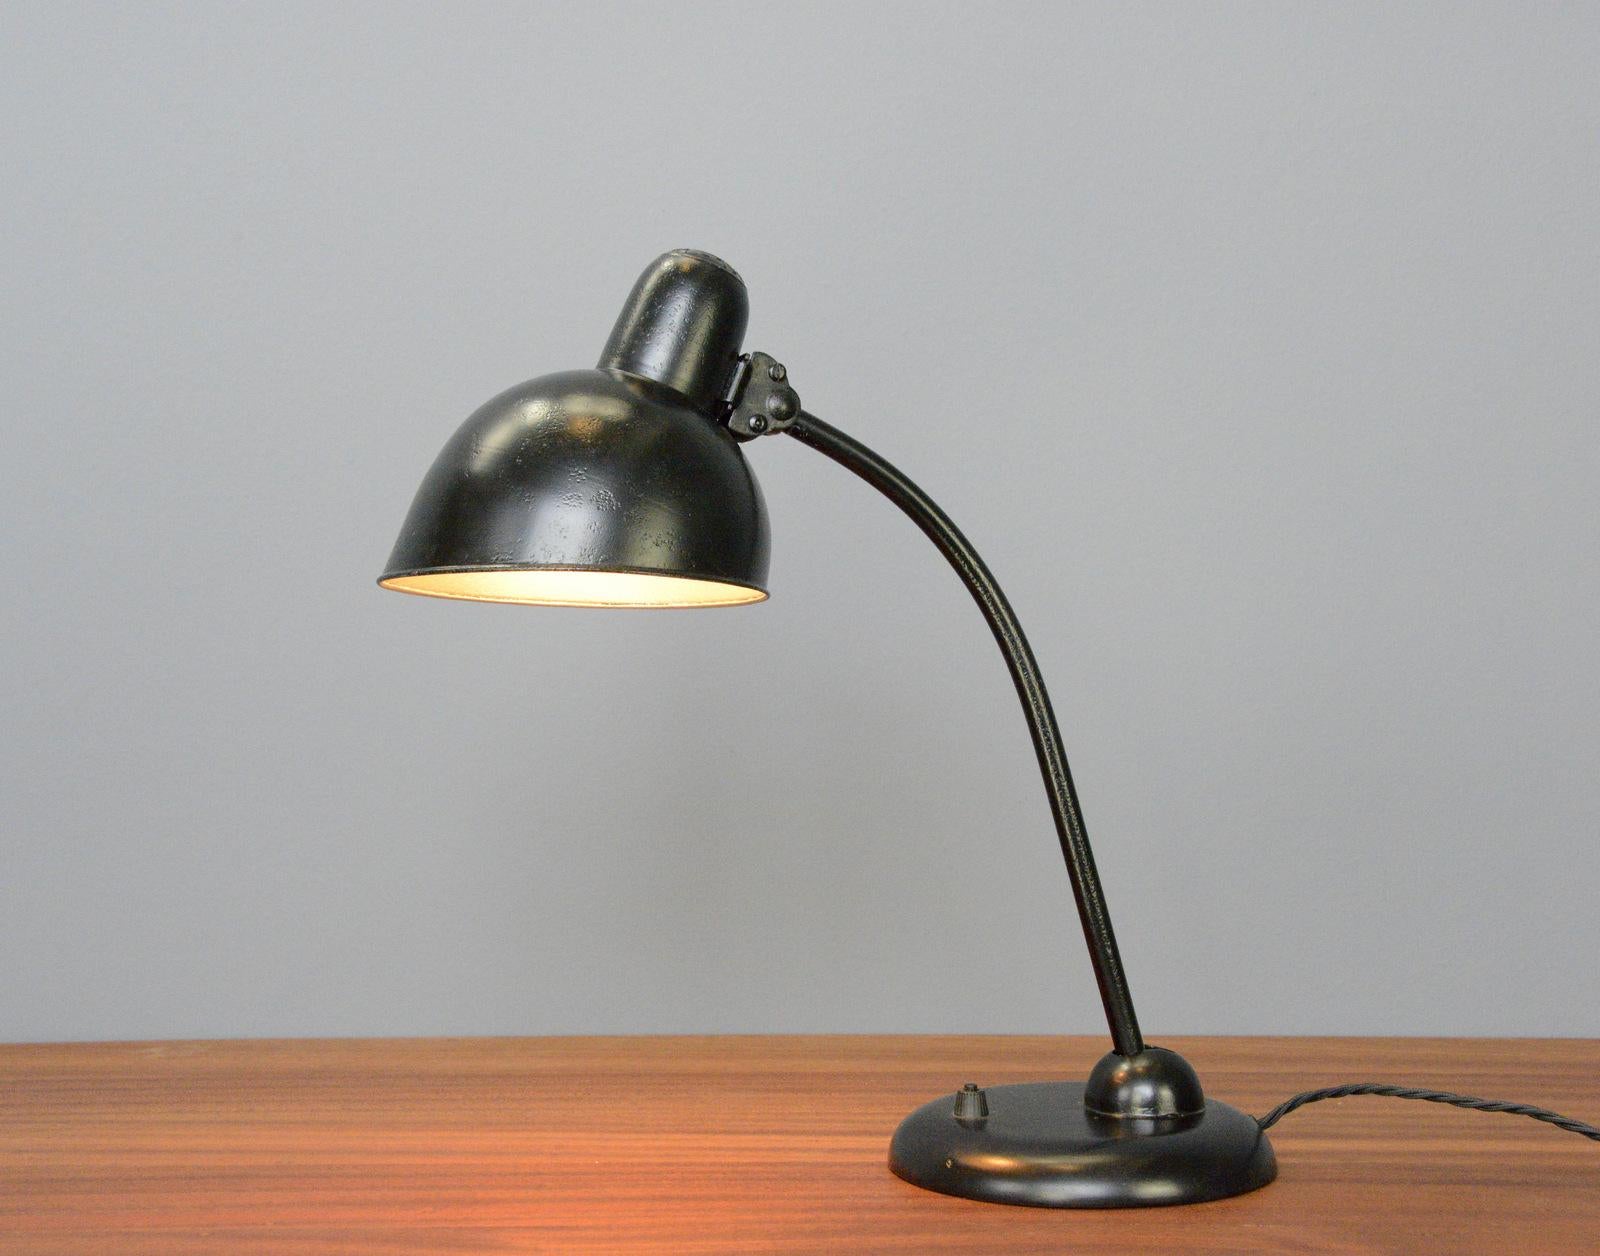 Model 6556 table lamp by Kaiser Jdell Circa 1930s

- Steel shade with relief Kaiser Jdell branding
- On/Off switch on the base
- Takes E27 fitting bulbs
- Adjustable arm and shade
- Designed by Christian Dell
- Model 6556 Kaiser Idell
-